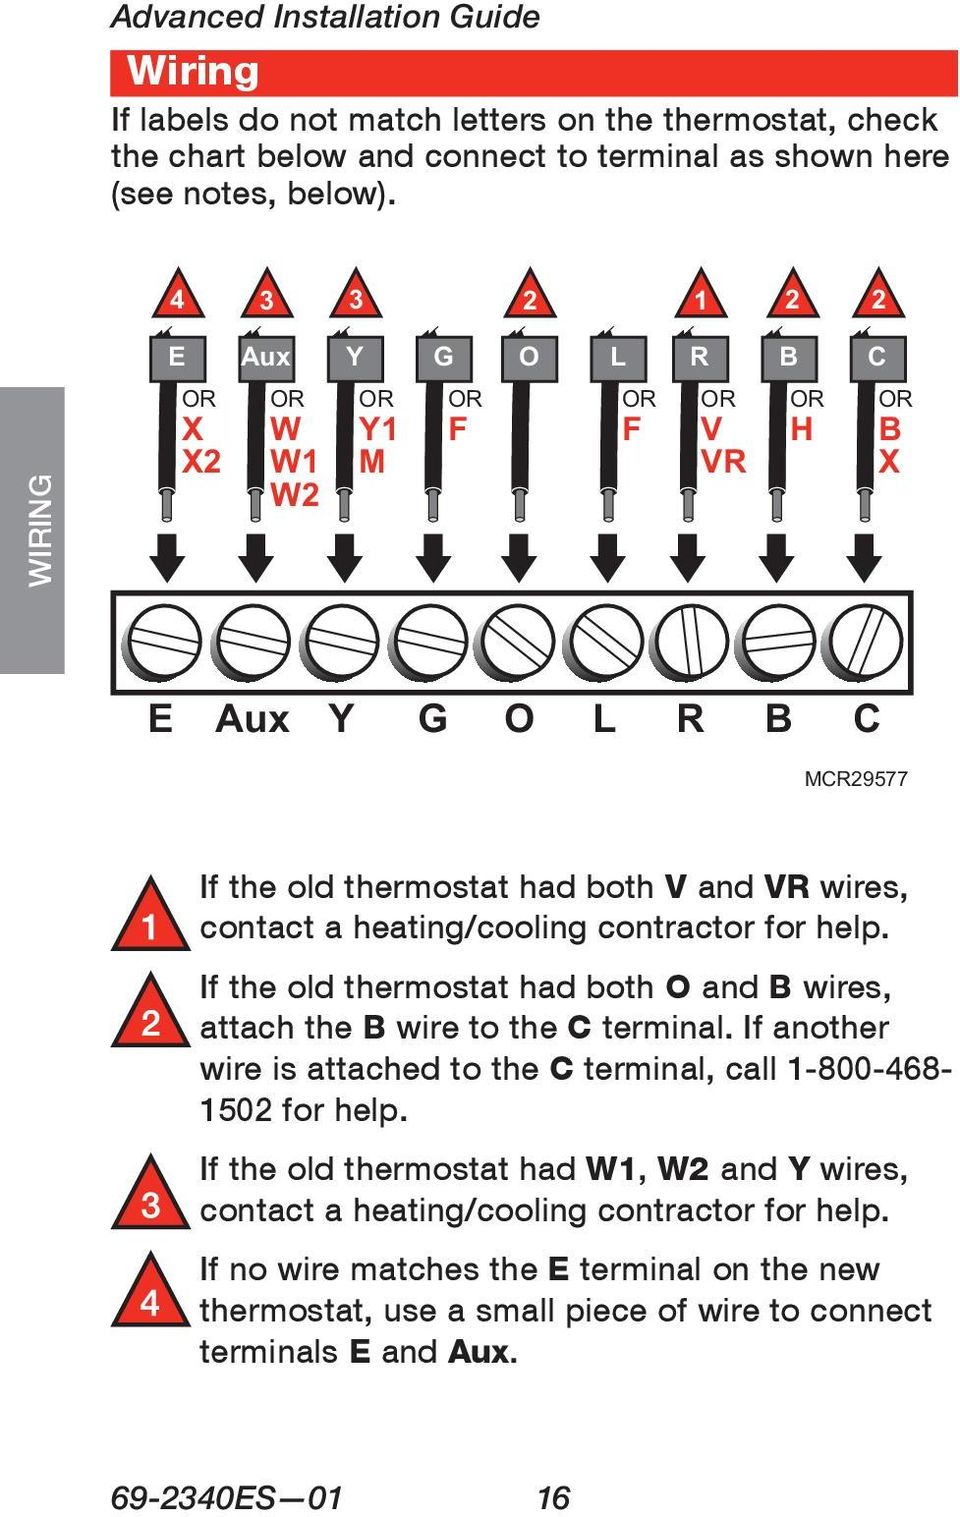 wires, contact a heating/cooling contractor for help. If the old thermostat had both O and B wires, attach the B wire to the C terminal.